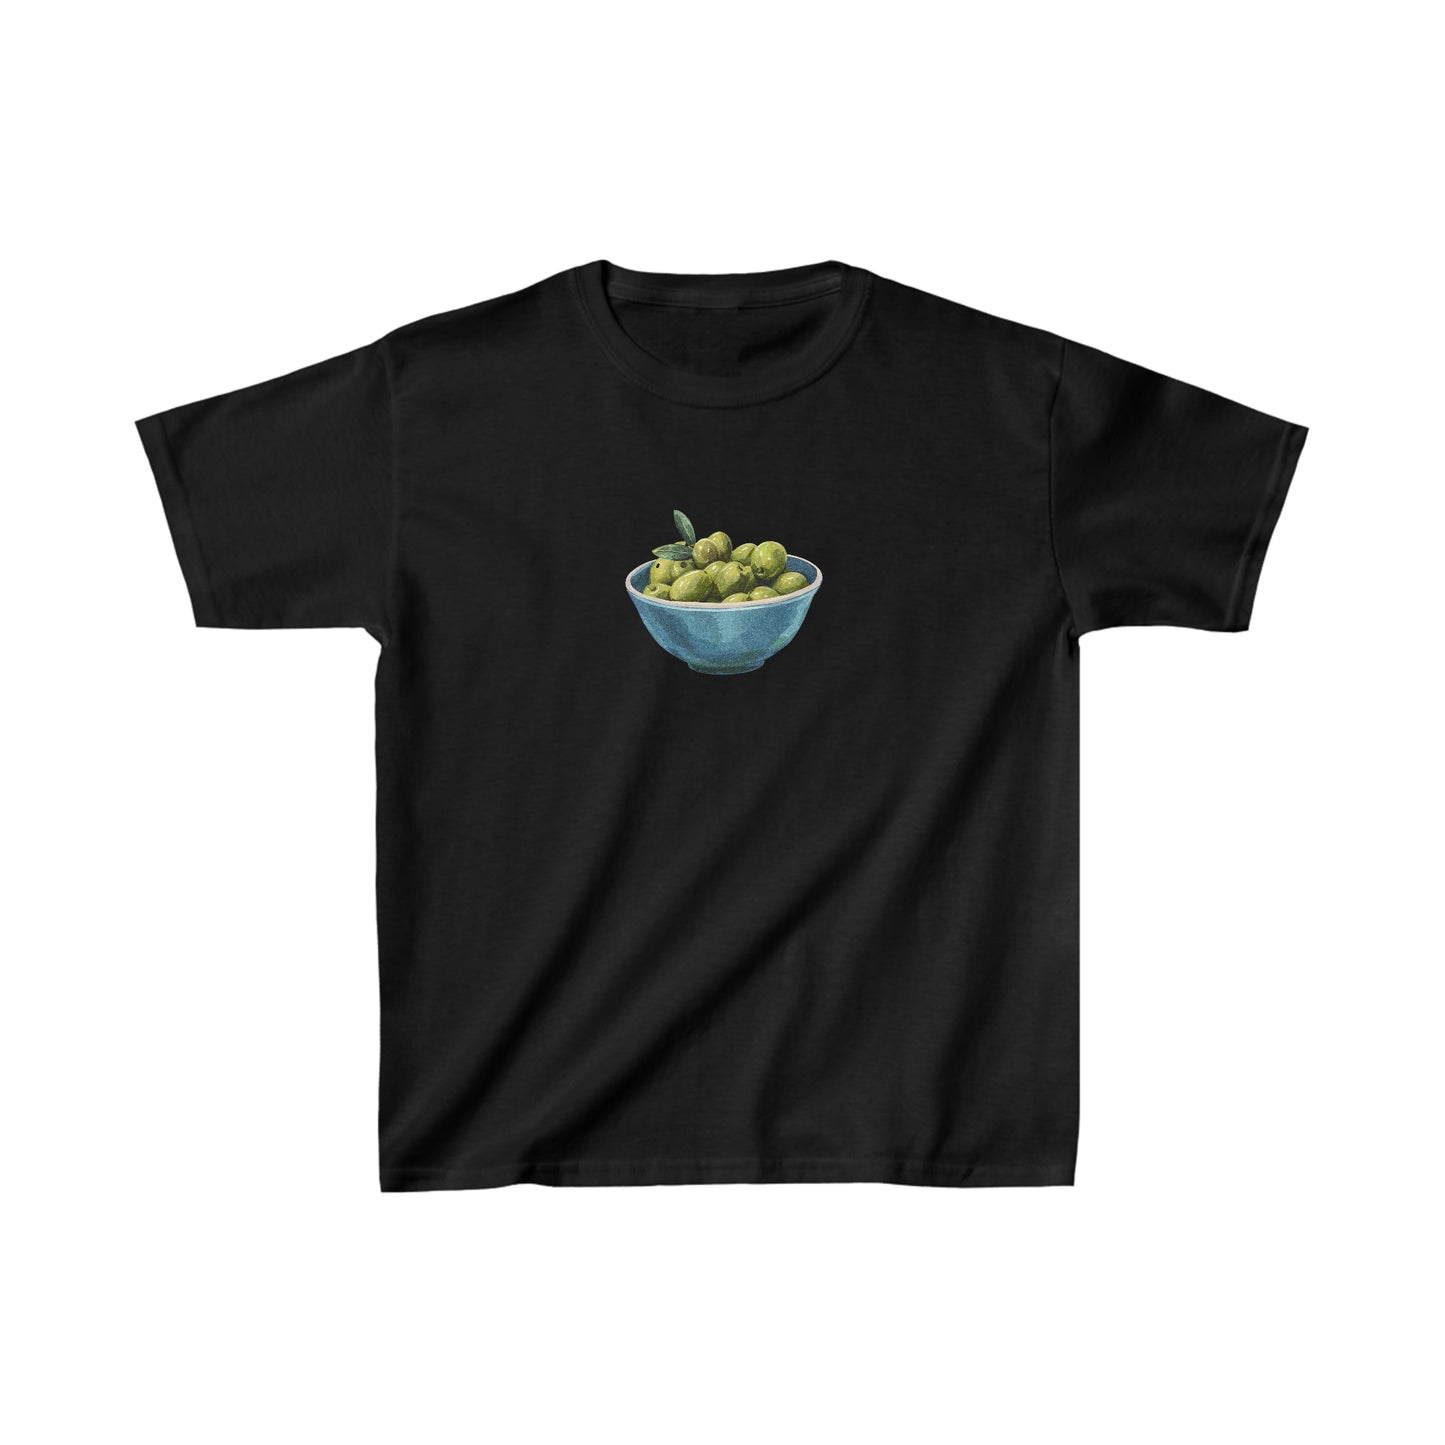 Olive Bowl Baby Tee